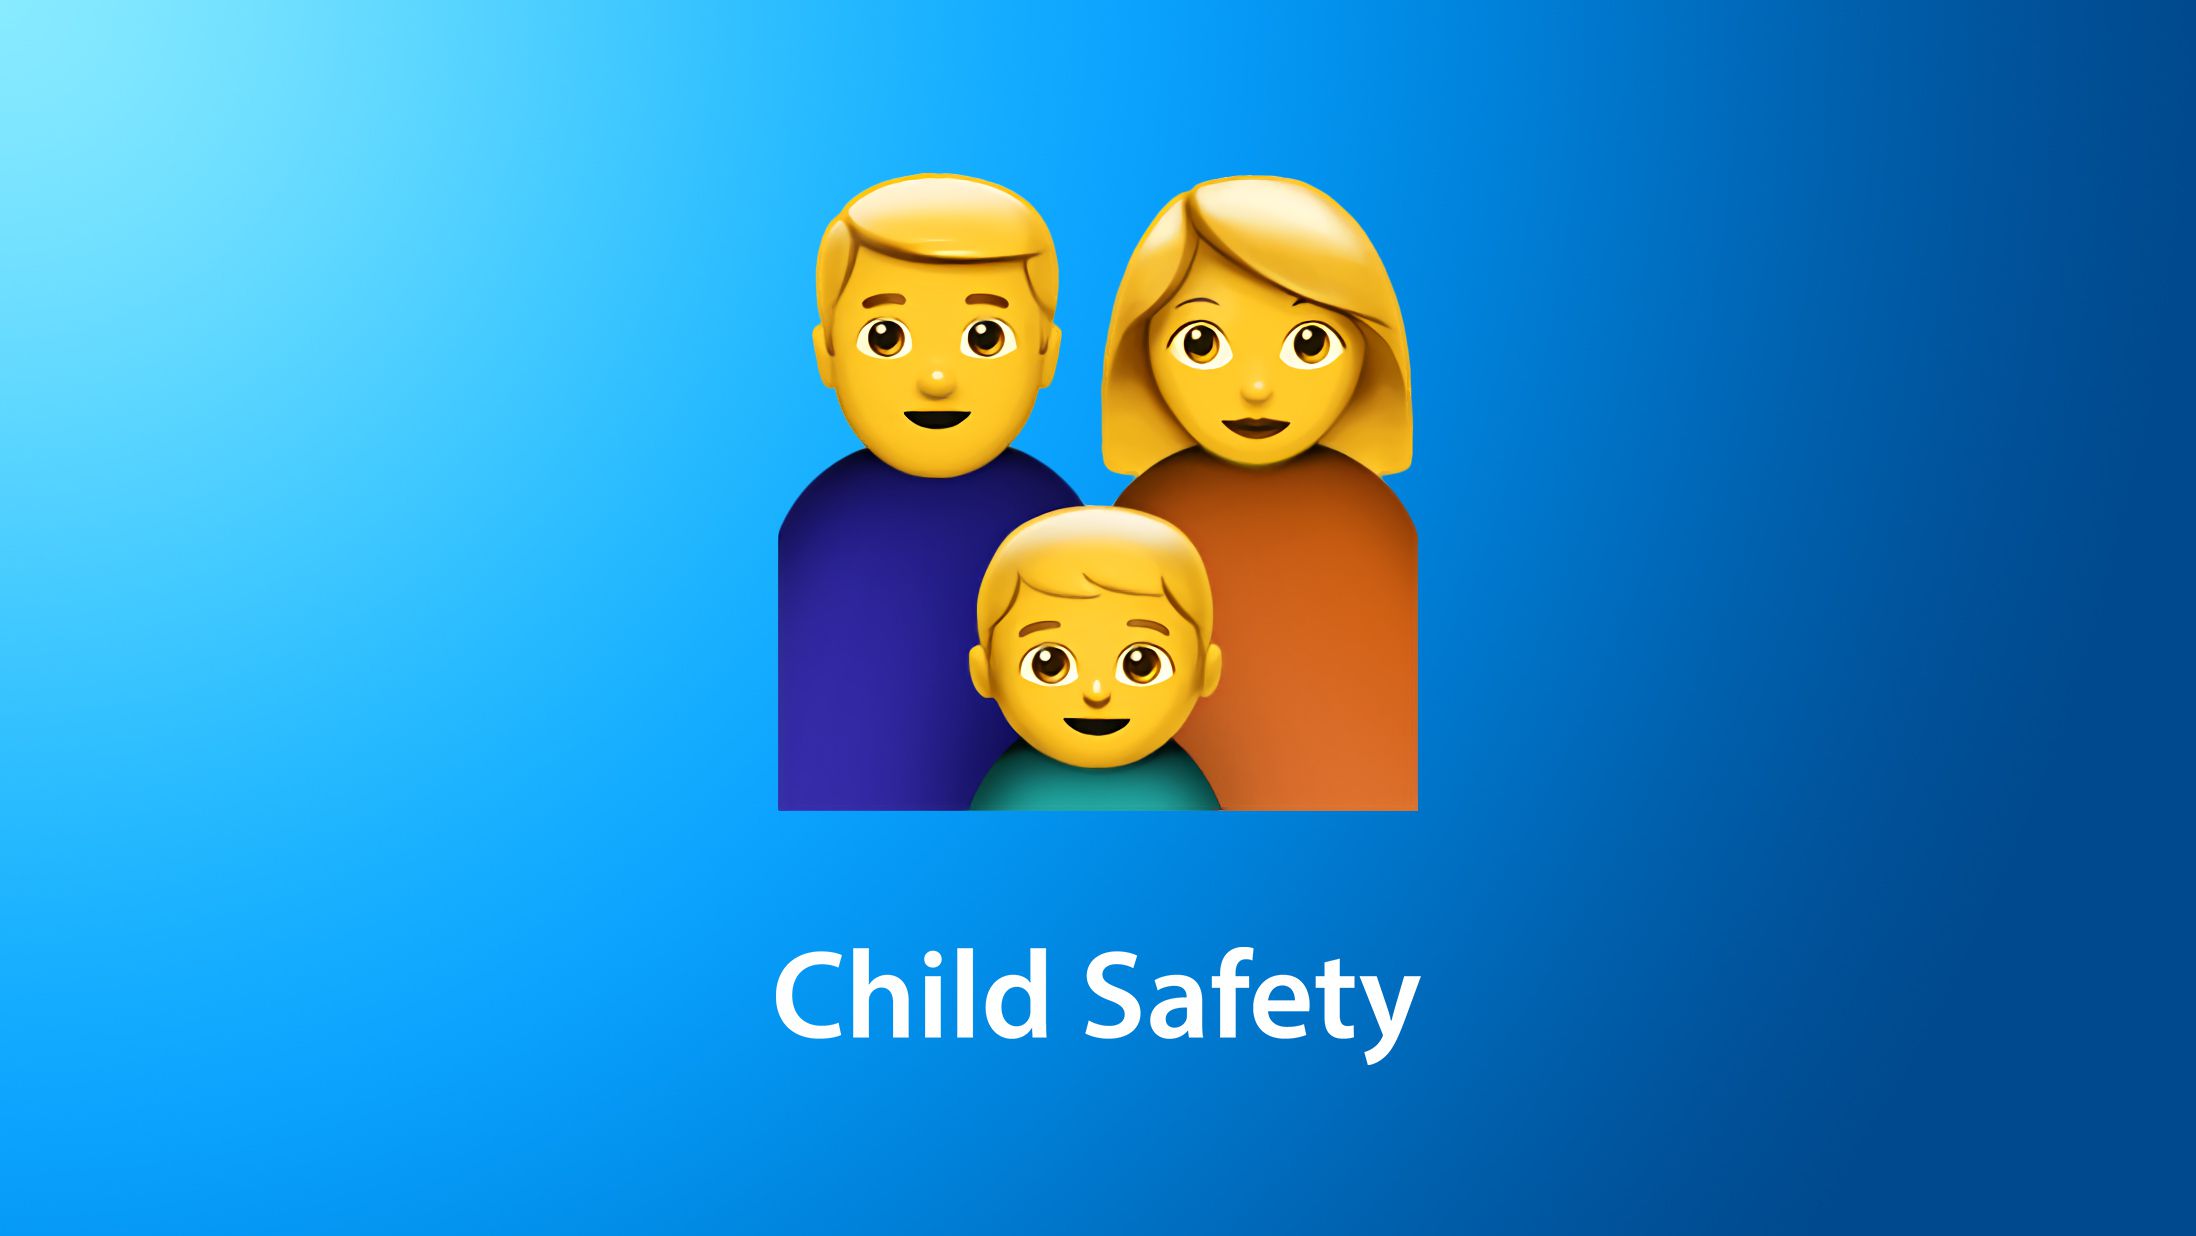 Apple Delays Rollout of Controversial Child Safety Features to Make Improvements